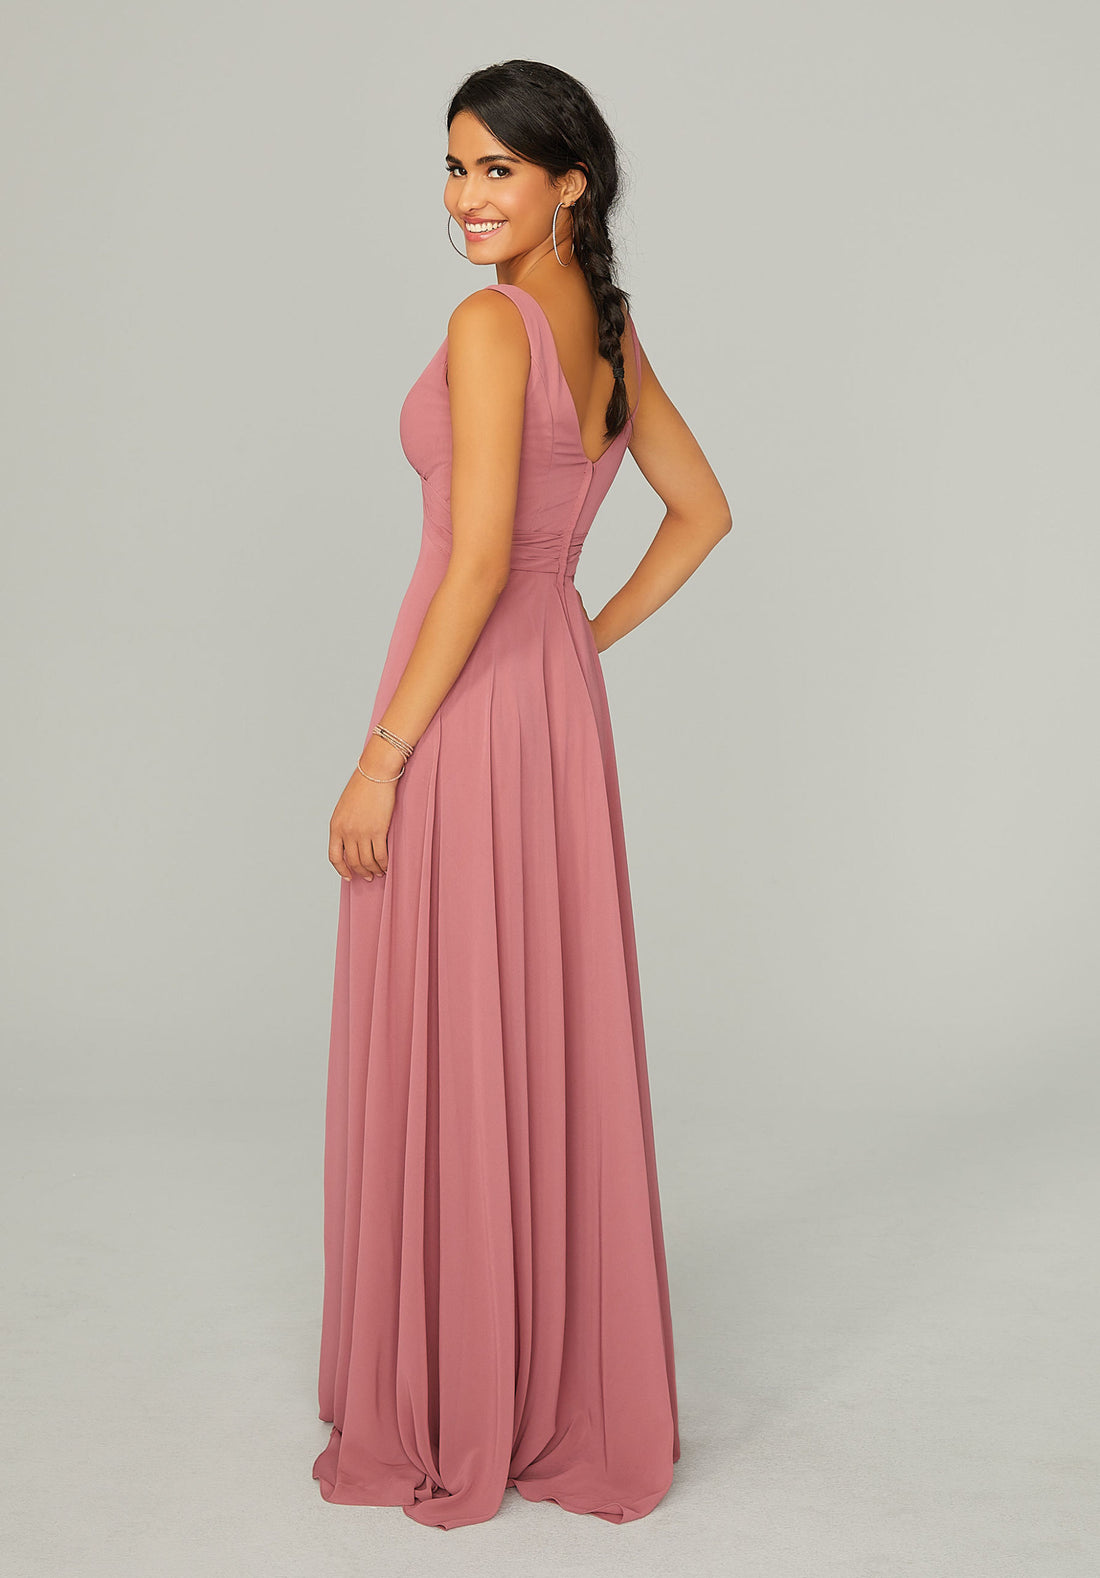 Morilee Knotted Bodice Chiffon Bridesmaid Dress in Bordeaux